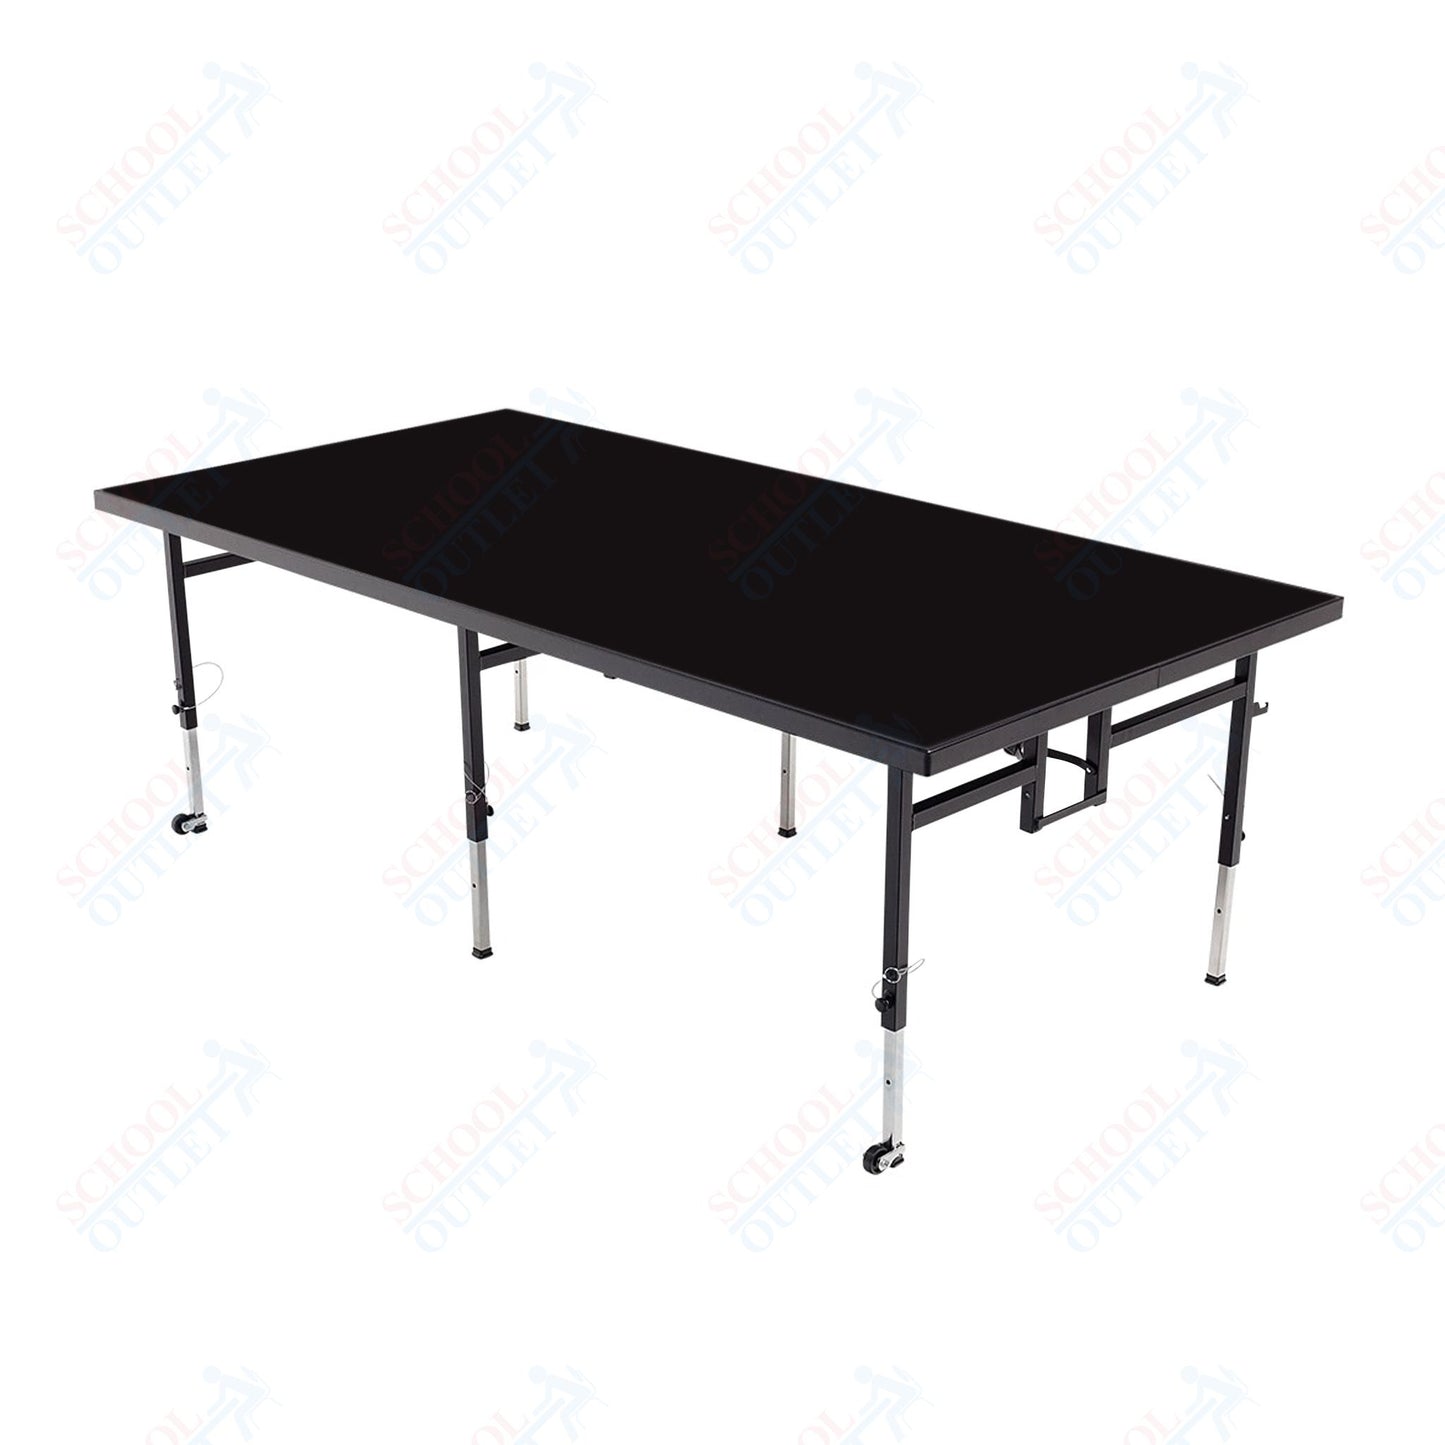 AmTab Adjustable Height Stage - Polypropylene Top - 36"W x 96"L x Adjustable 16" to 24"H  (AmTab AMT-STA3816P)